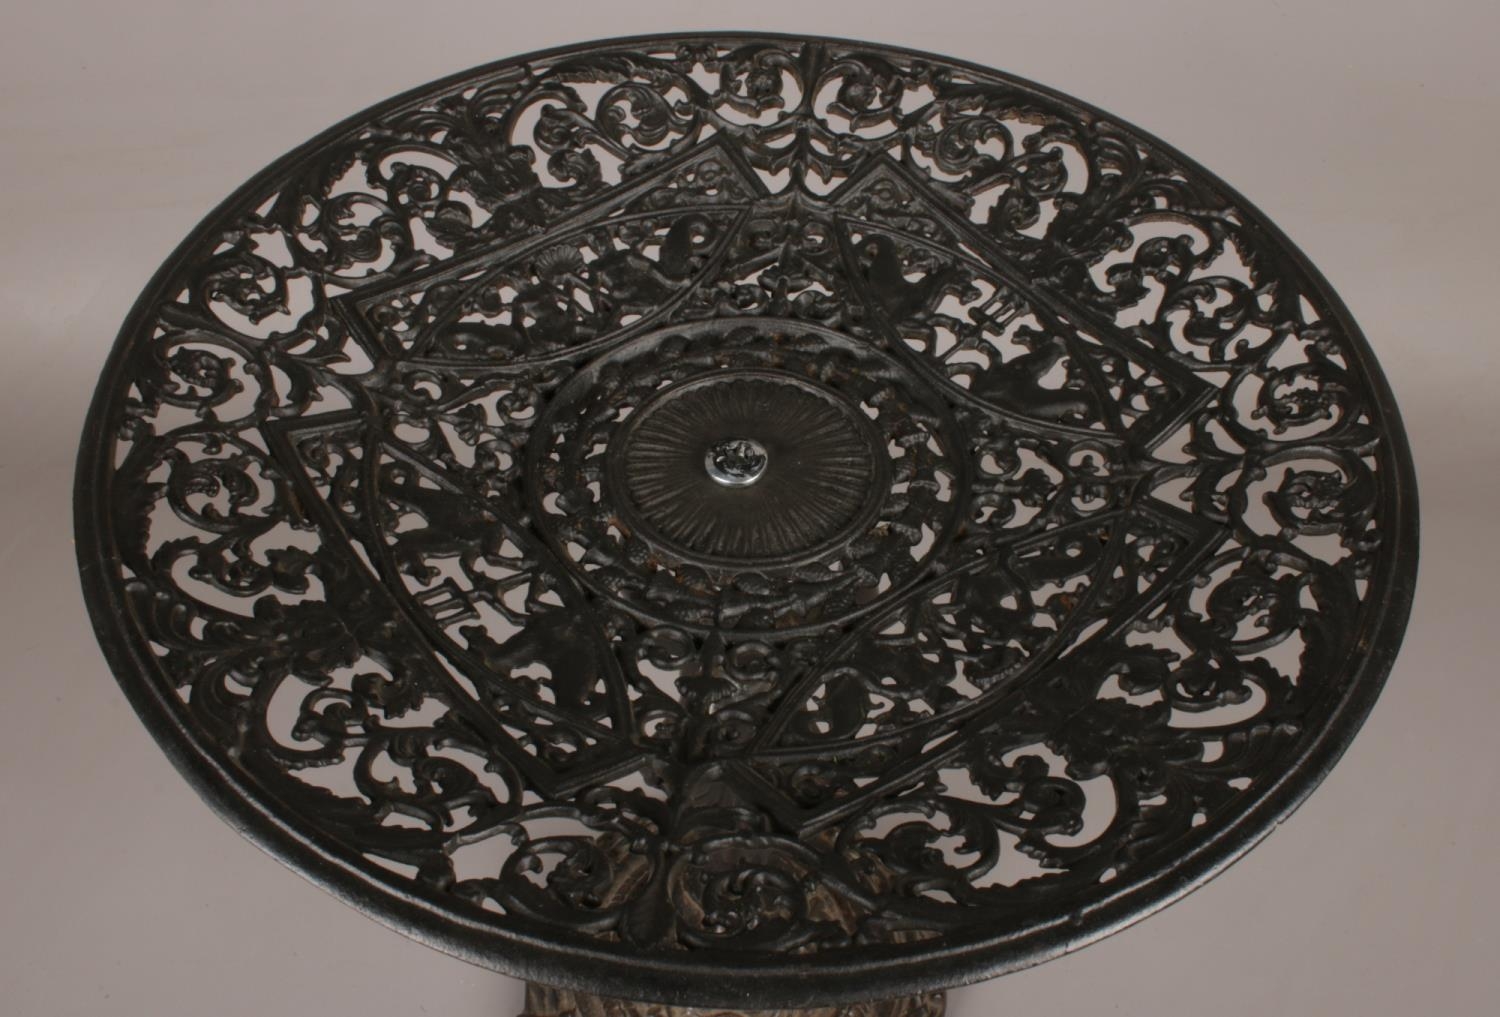 A cast iron 'Lady Tessa' centrepiece. Decorated in a classical style. H: 34cm, W: 29cm. Condition - Image 2 of 3